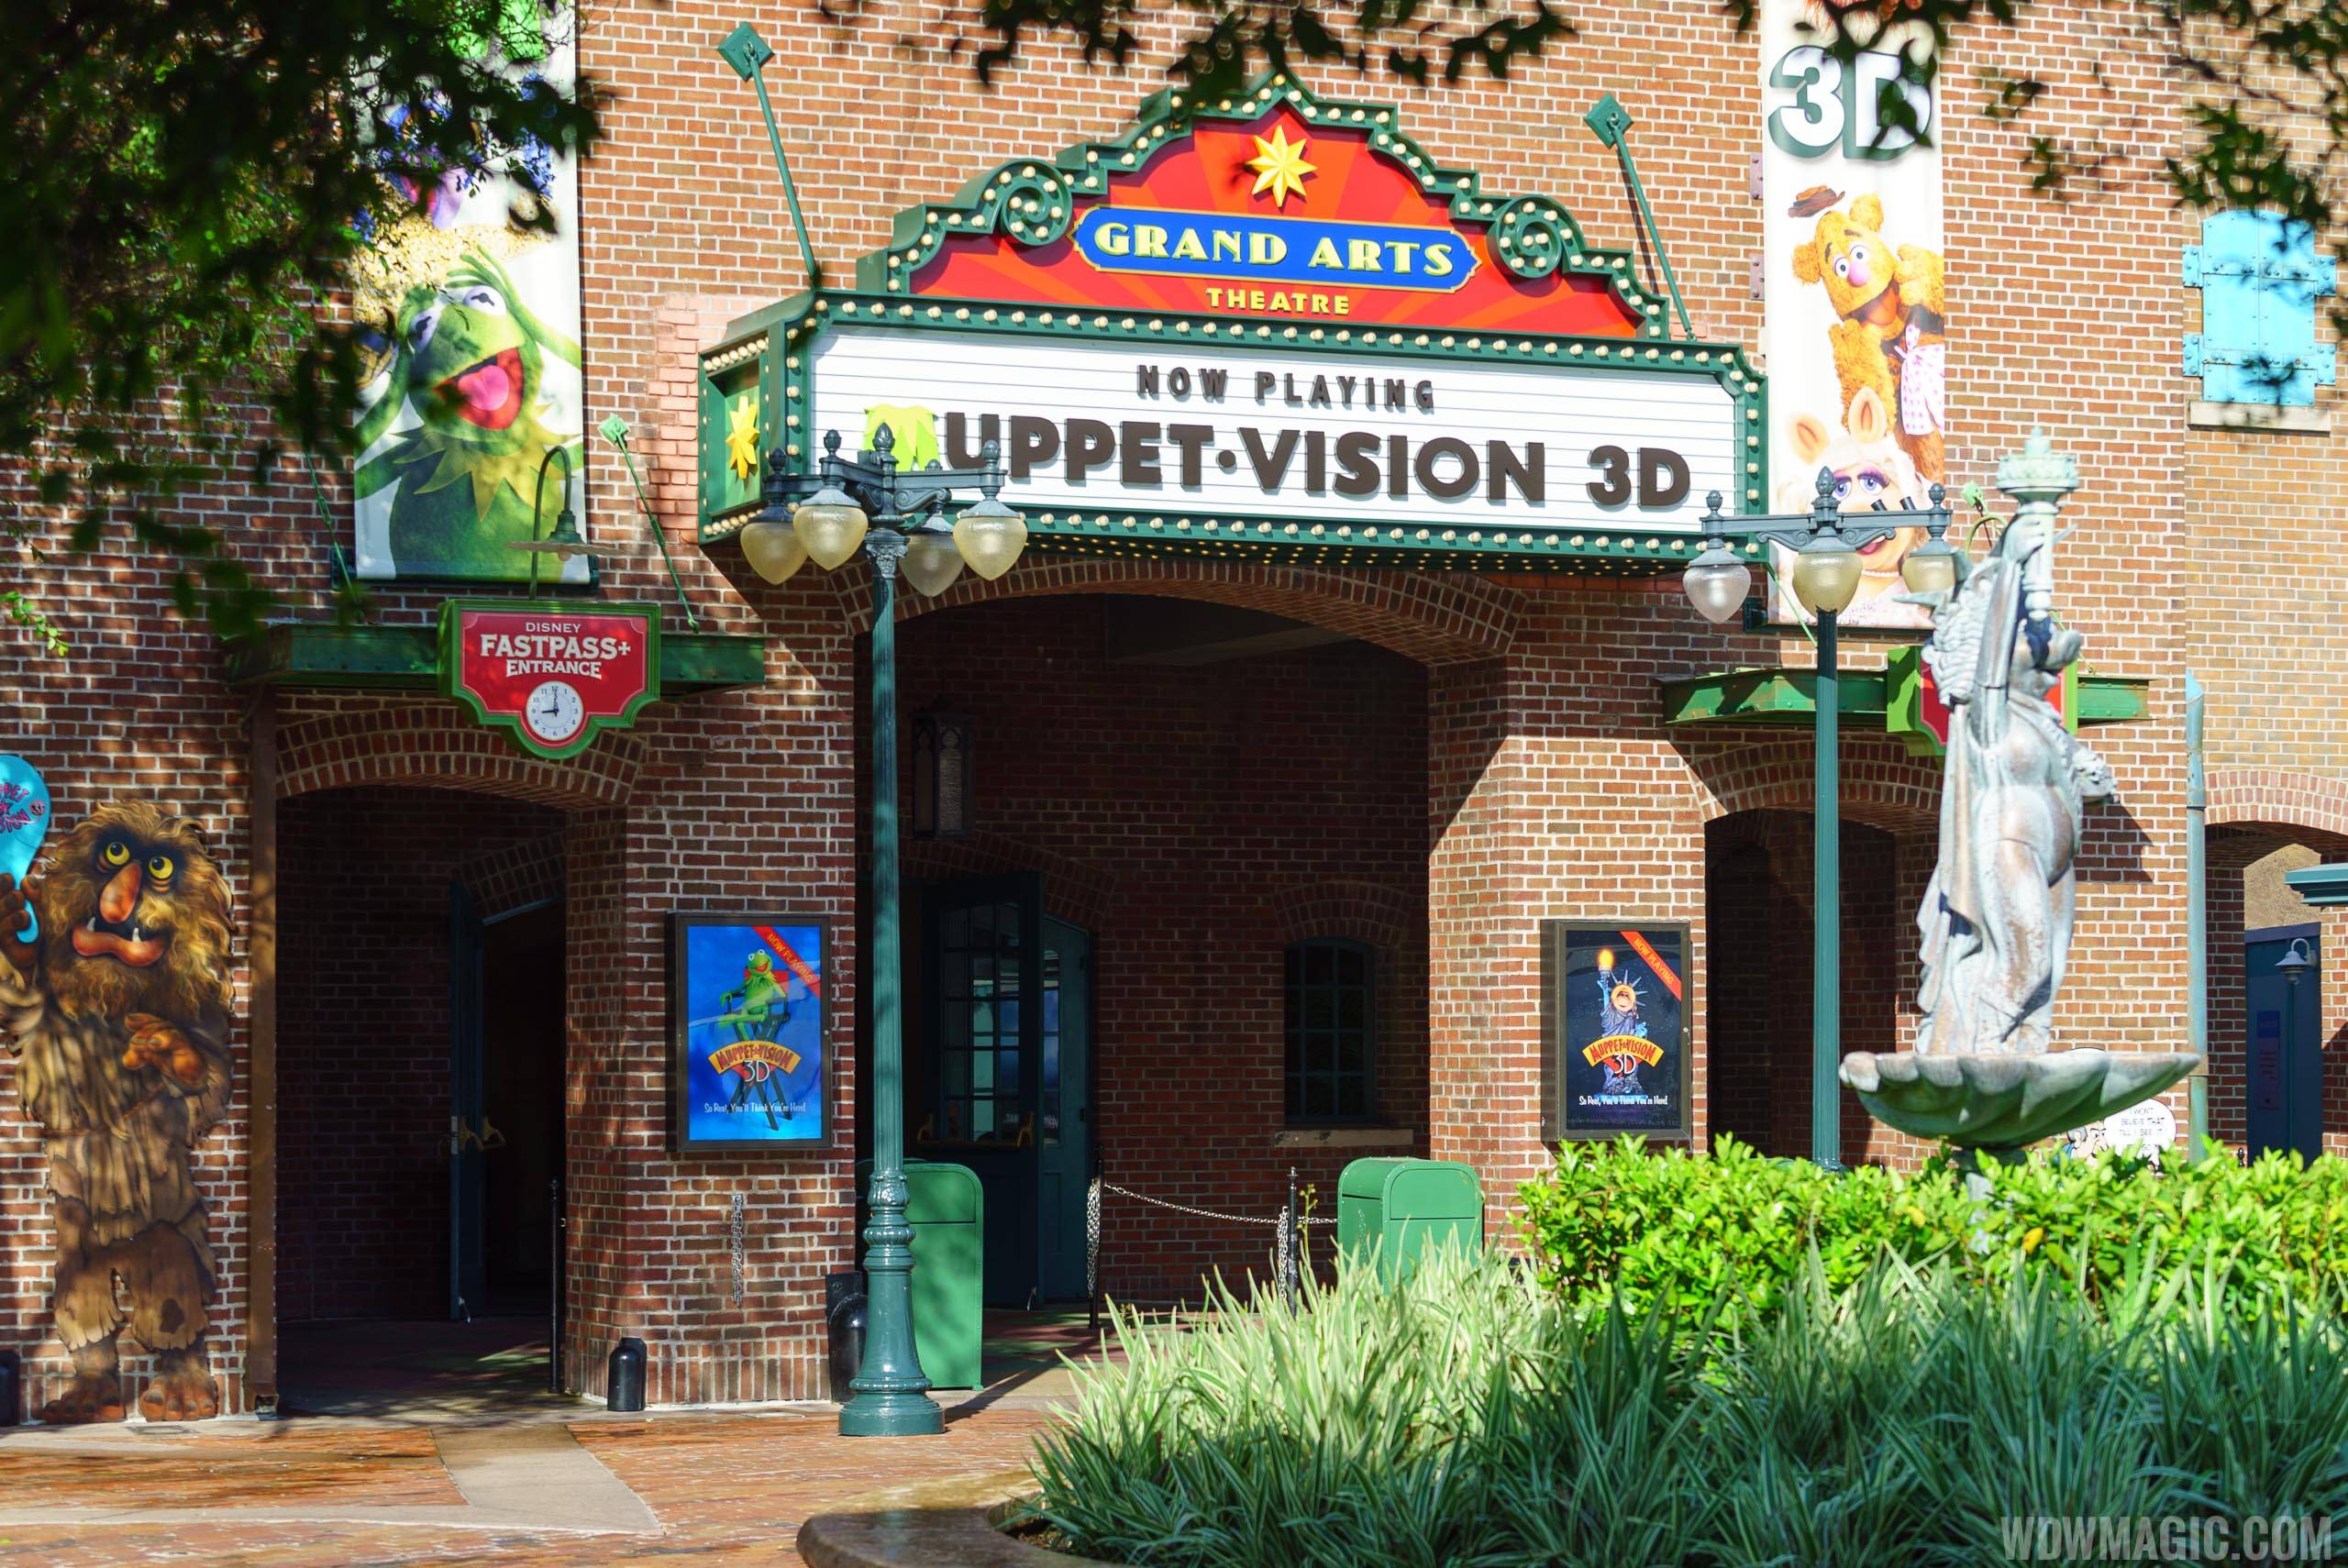 'Muppets Haunted Mansion' joining the preshow at Muppet*Vision 3D